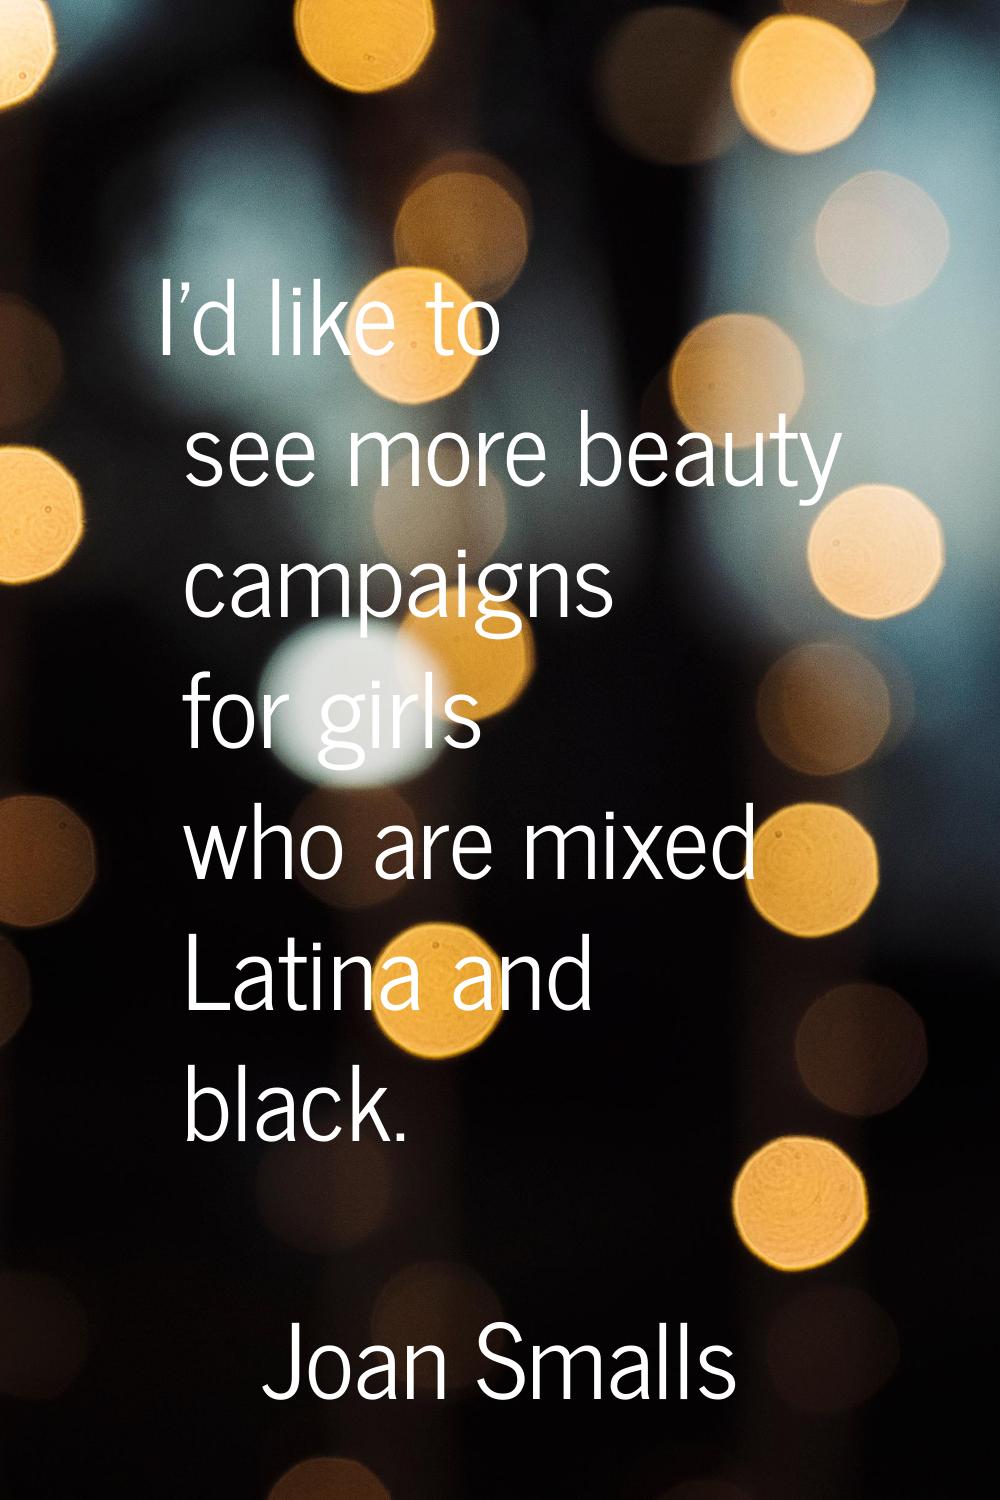 I'd like to see more beauty campaigns for girls who are mixed Latina and black.